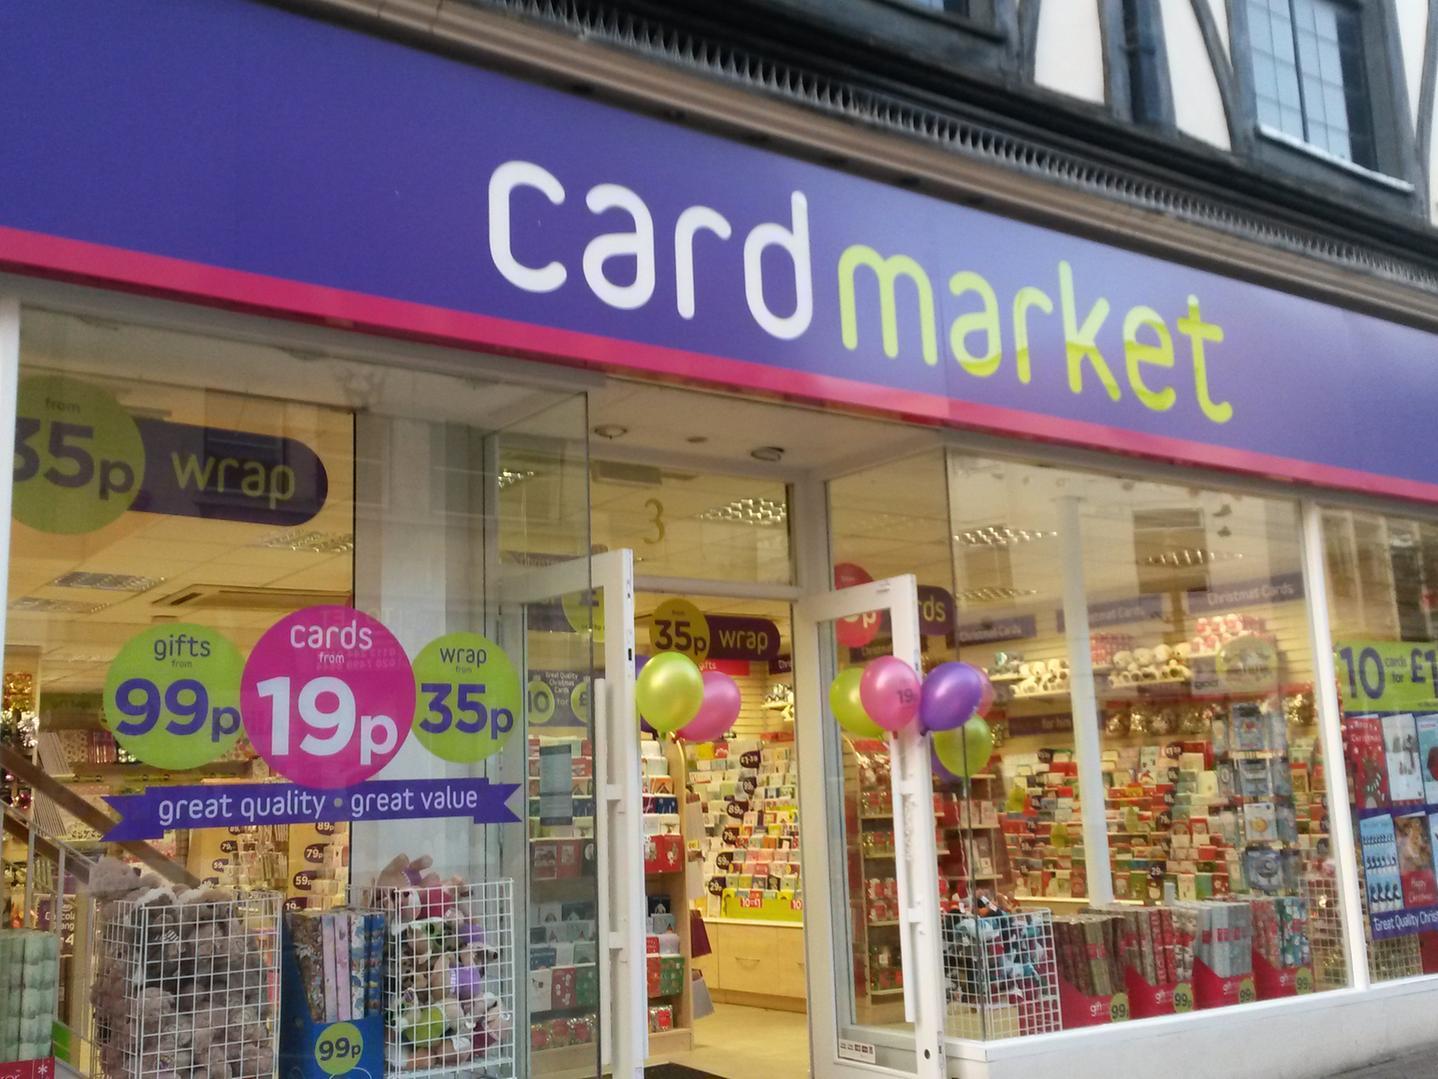 Cardmarket in Abington Street closed in July 2019 - plans were submitted for a restaurant to take over the unit